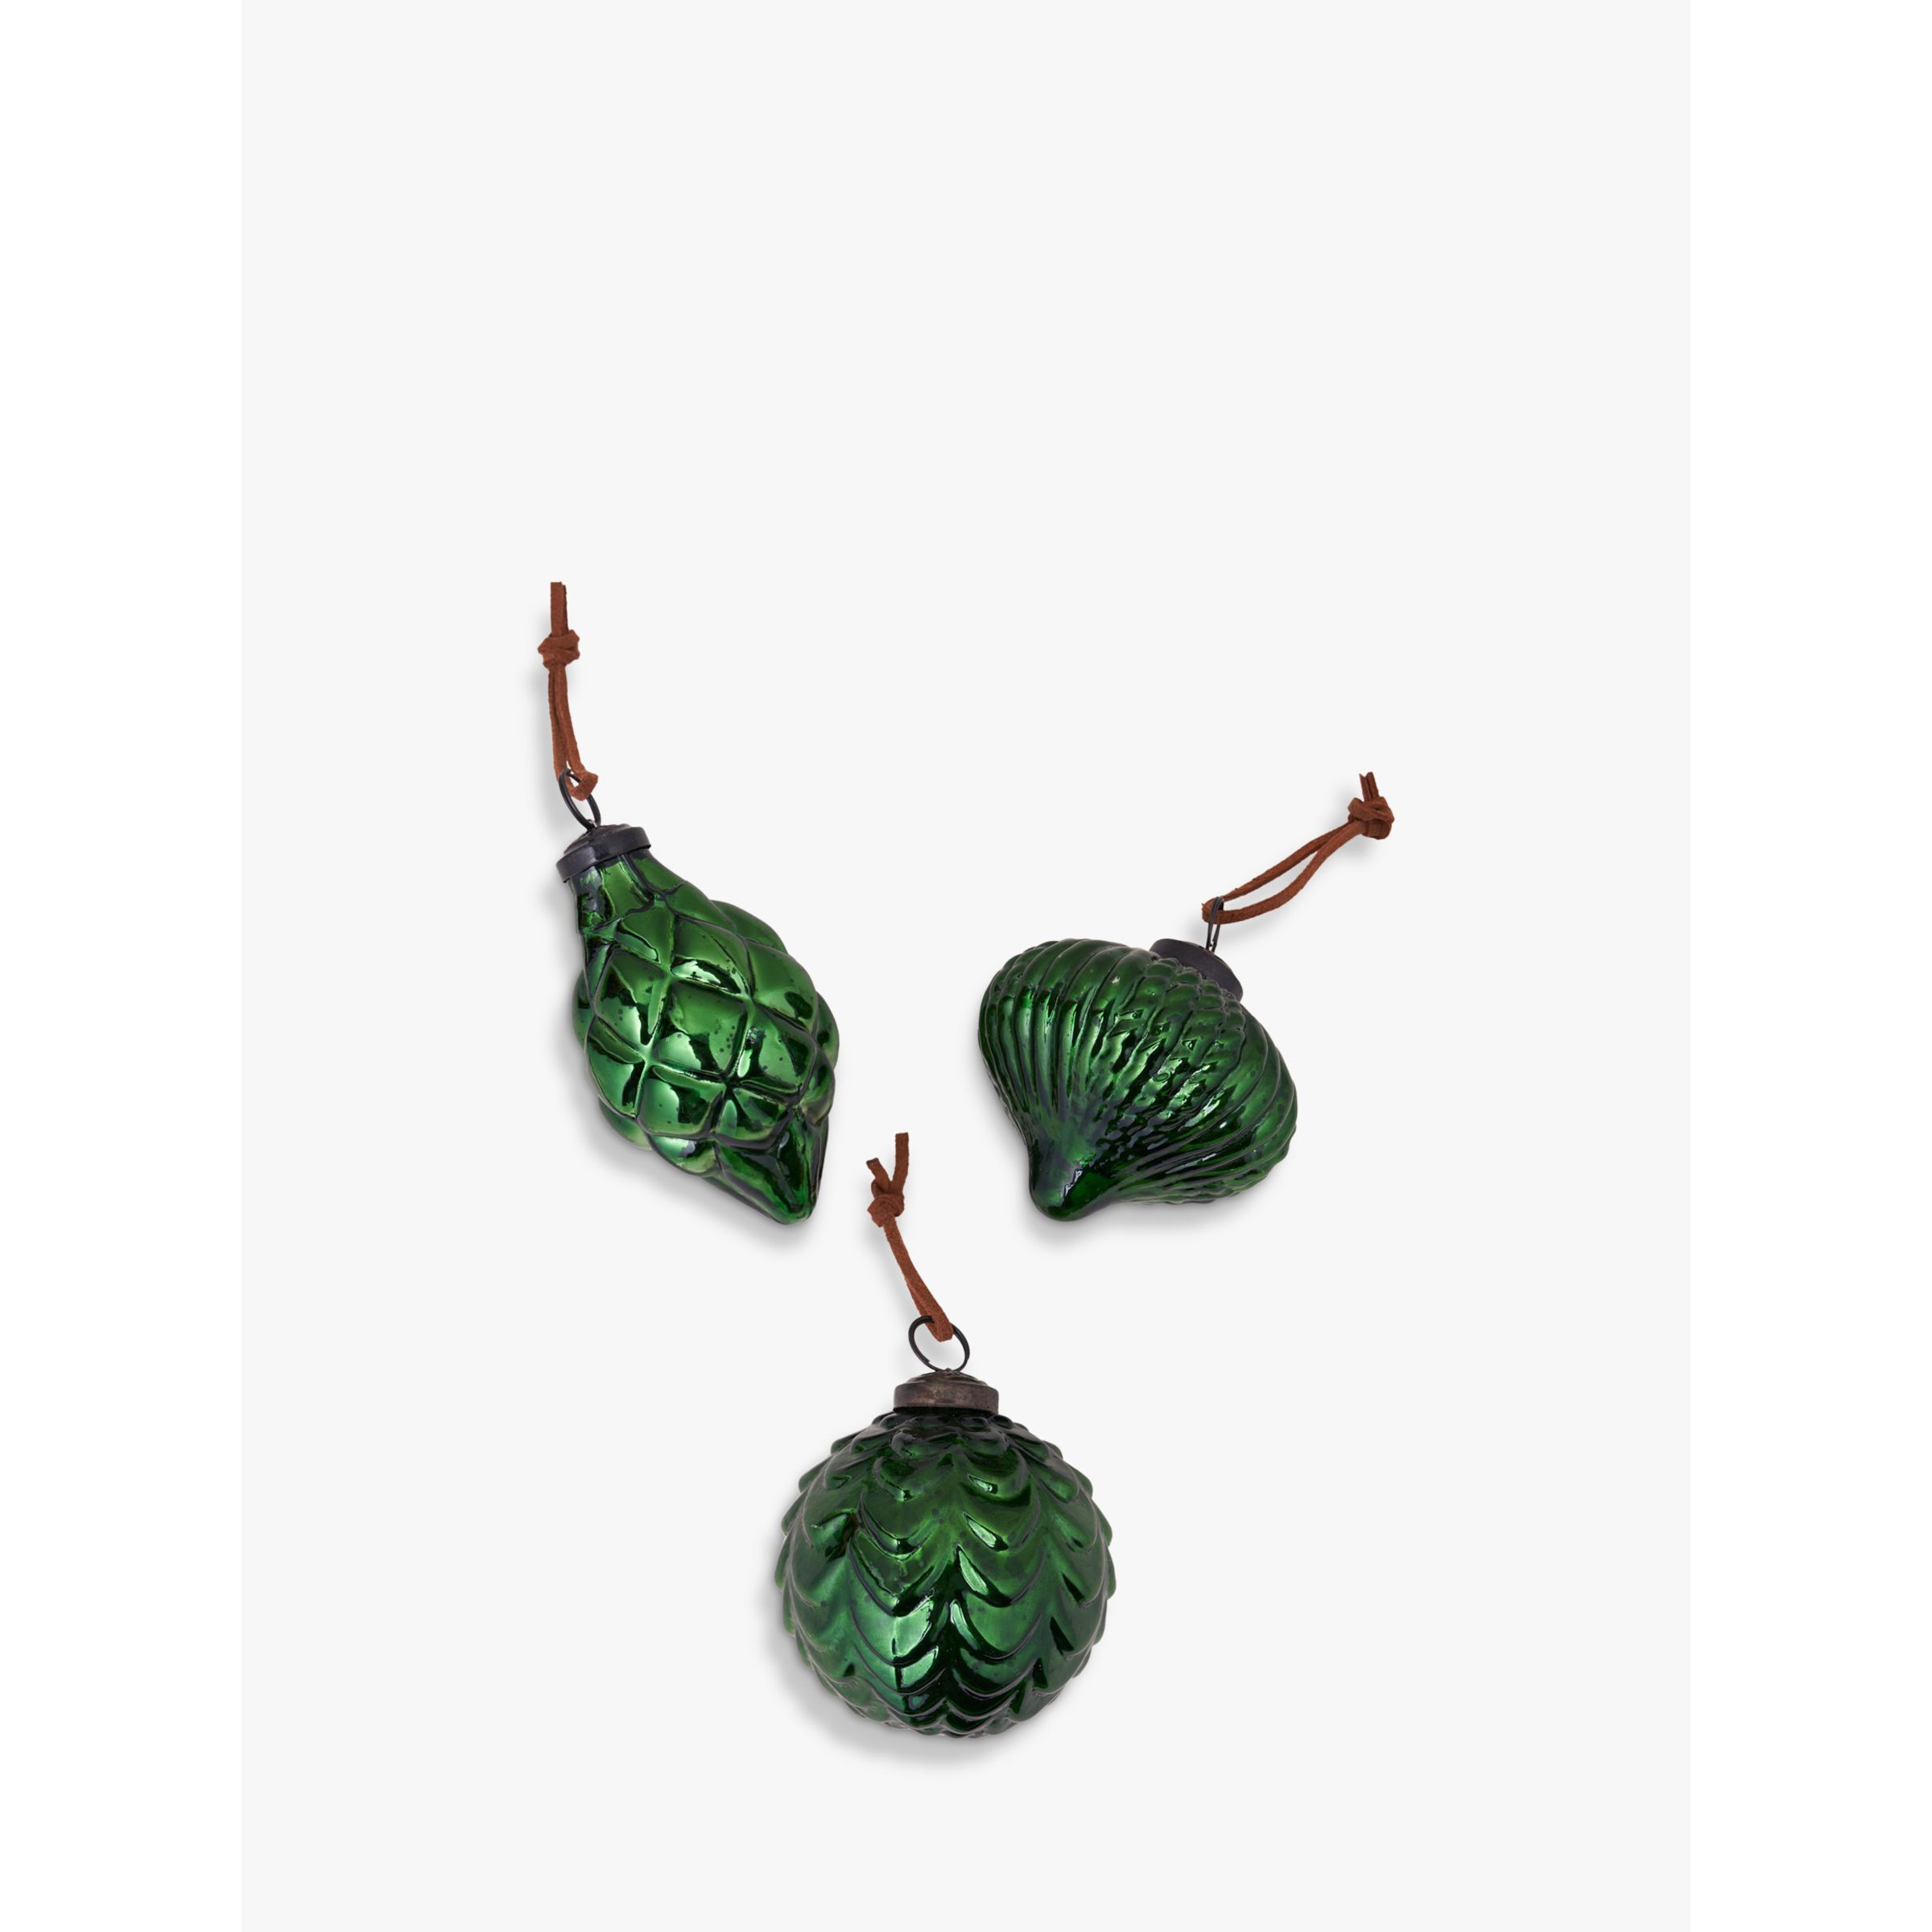 Truly Glass Baubles, Pack of 3 - image 1